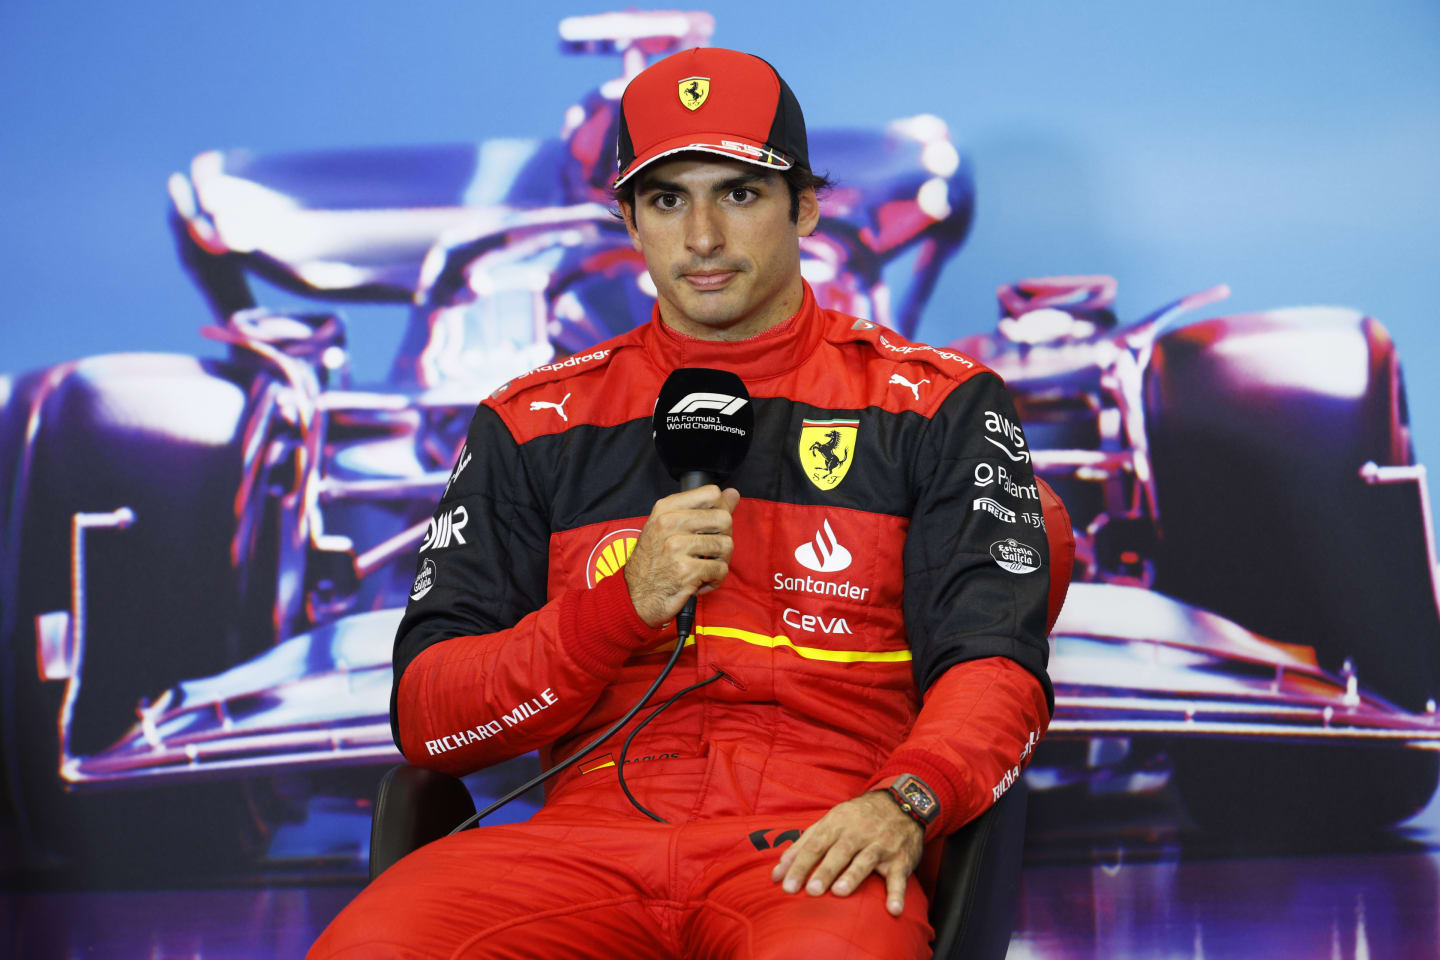 AUSTIN, TEXAS - OCTOBER 22: Pole position qualifier Carlos Sainz of Spain and Ferrari attends the press conference after qualifying ahead of the F1 Grand Prix of USA at Circuit of The Americas on October 22, 2022 in Austin, Texas. (Photo by Jared C. Tilton/Getty Images)